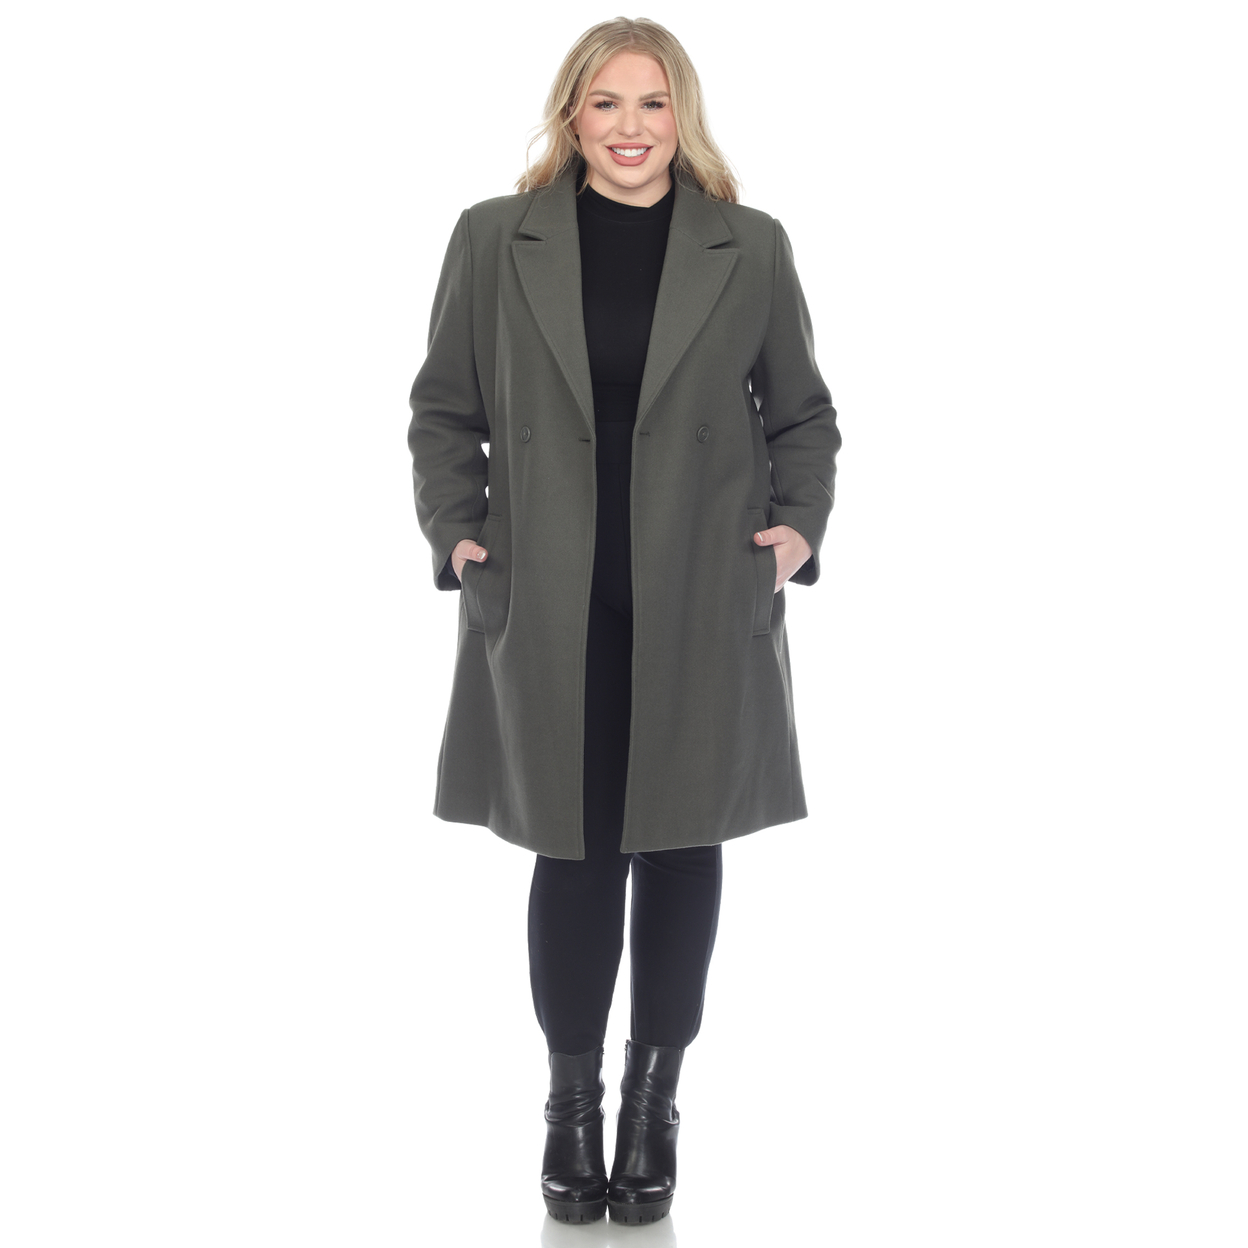 White Mark Women's Long Sleeve Classic Double-Breasted Walker Coat - Olive, 2X